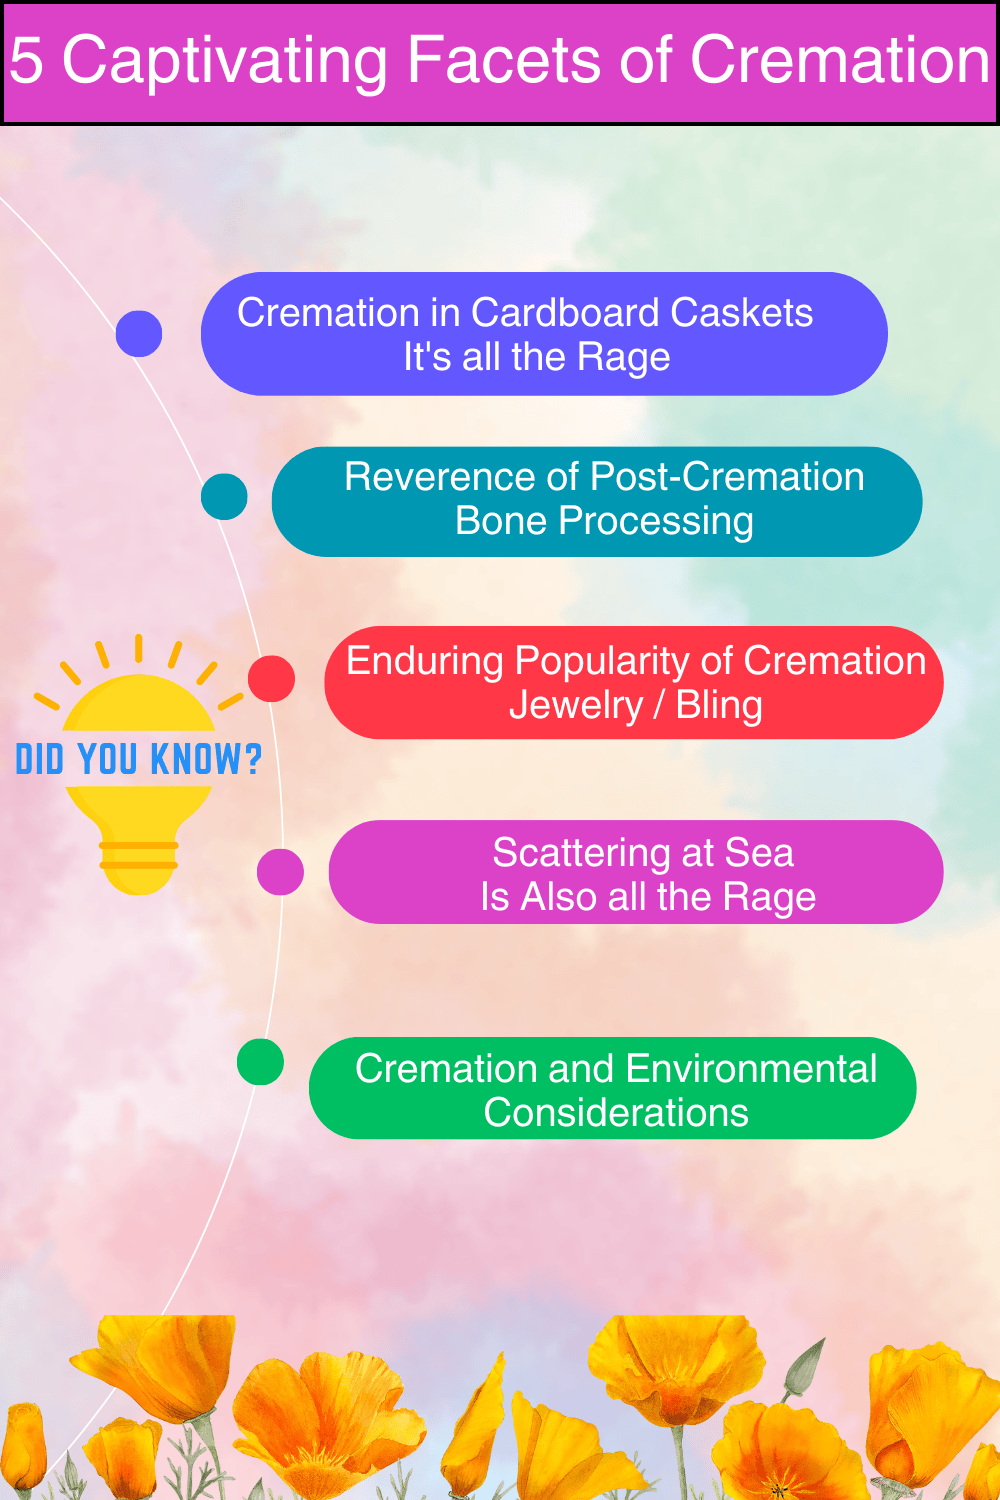 5 Cremation Facts